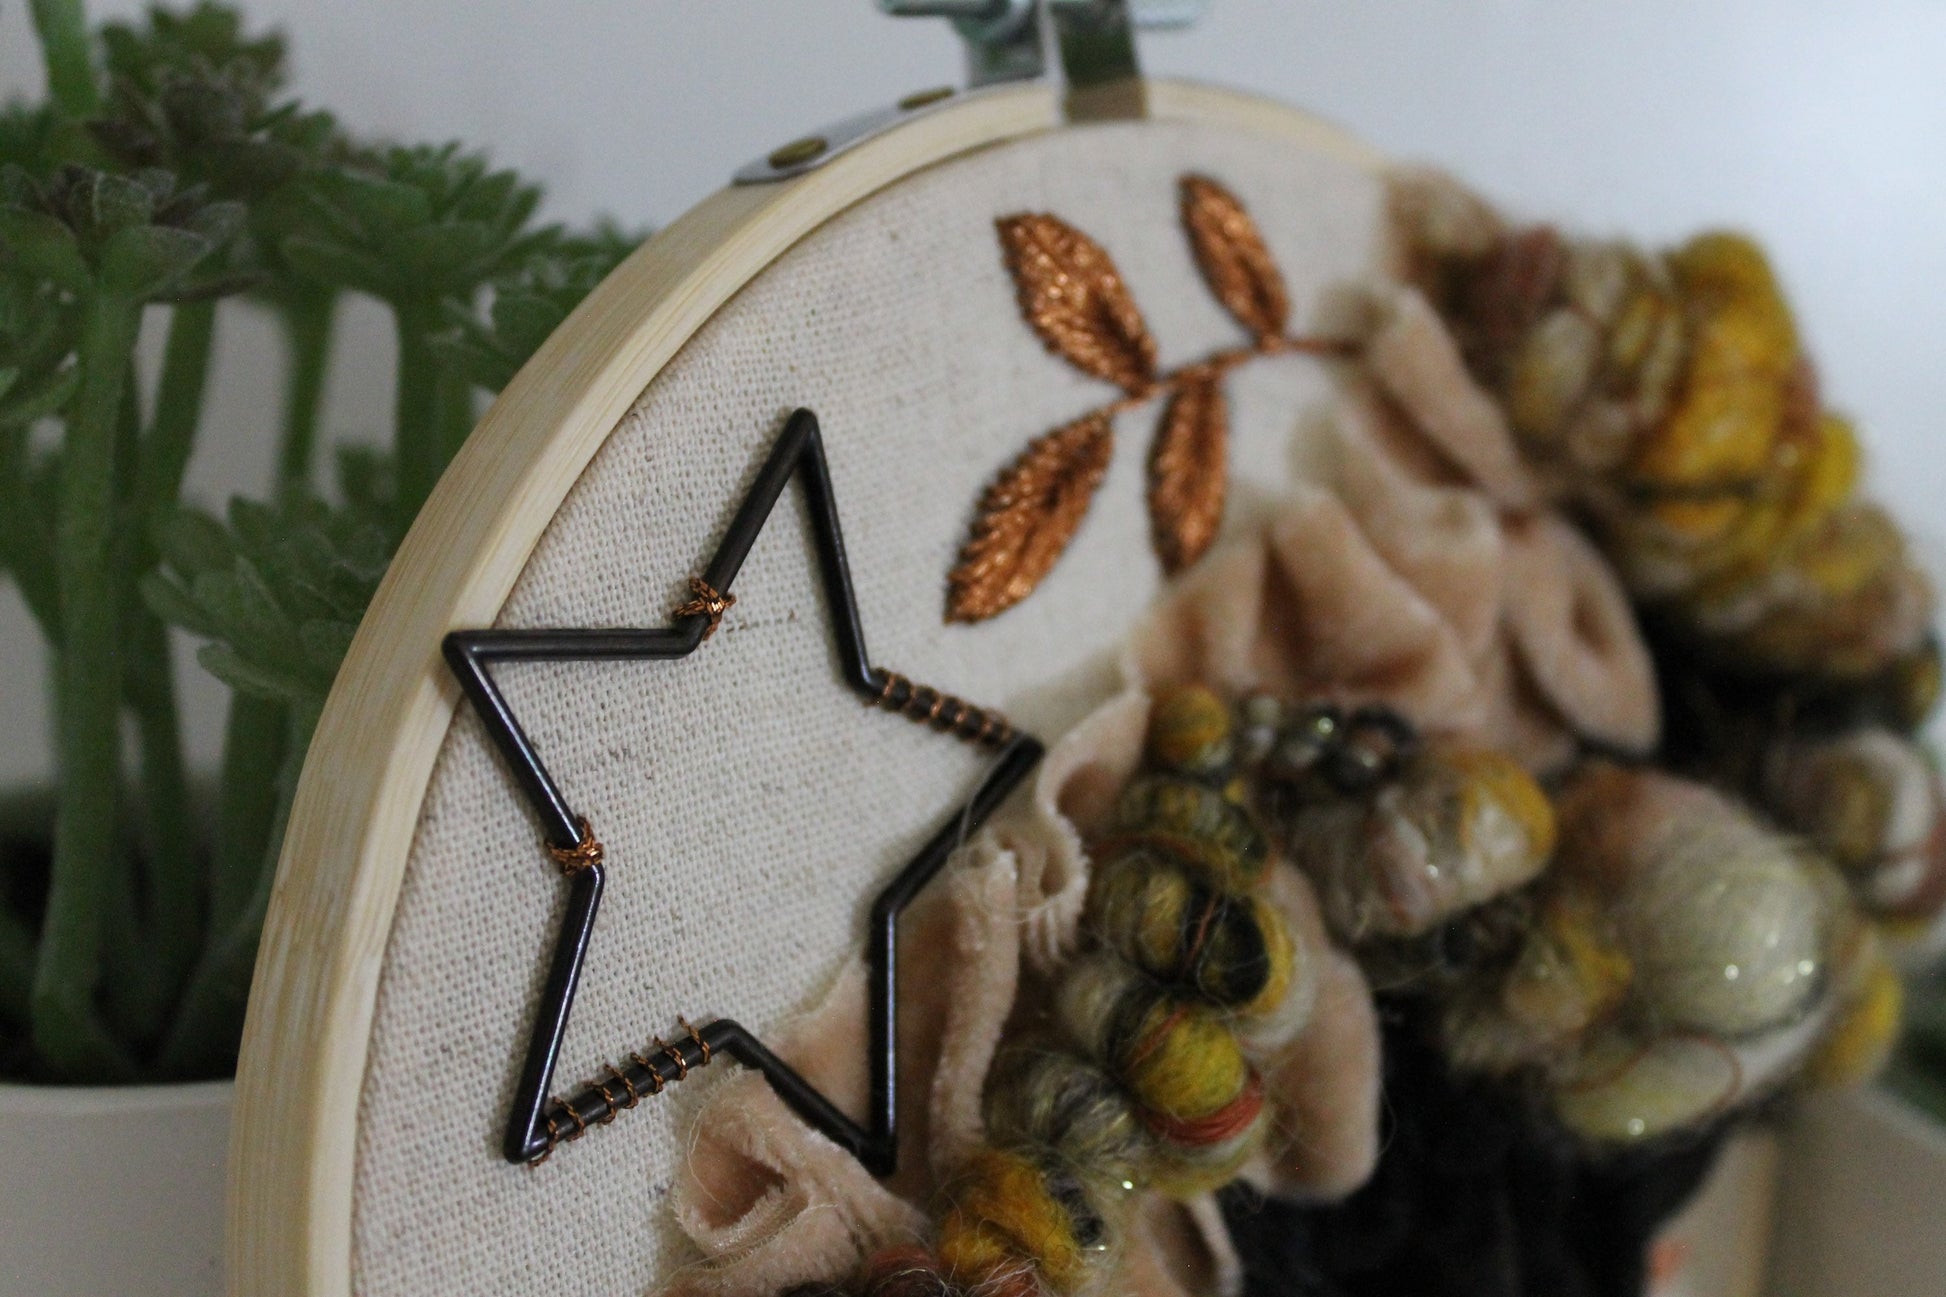 Copper abstract embroidery | yellow and black | embroidery hoop | foil embroidery | diy | gift idea